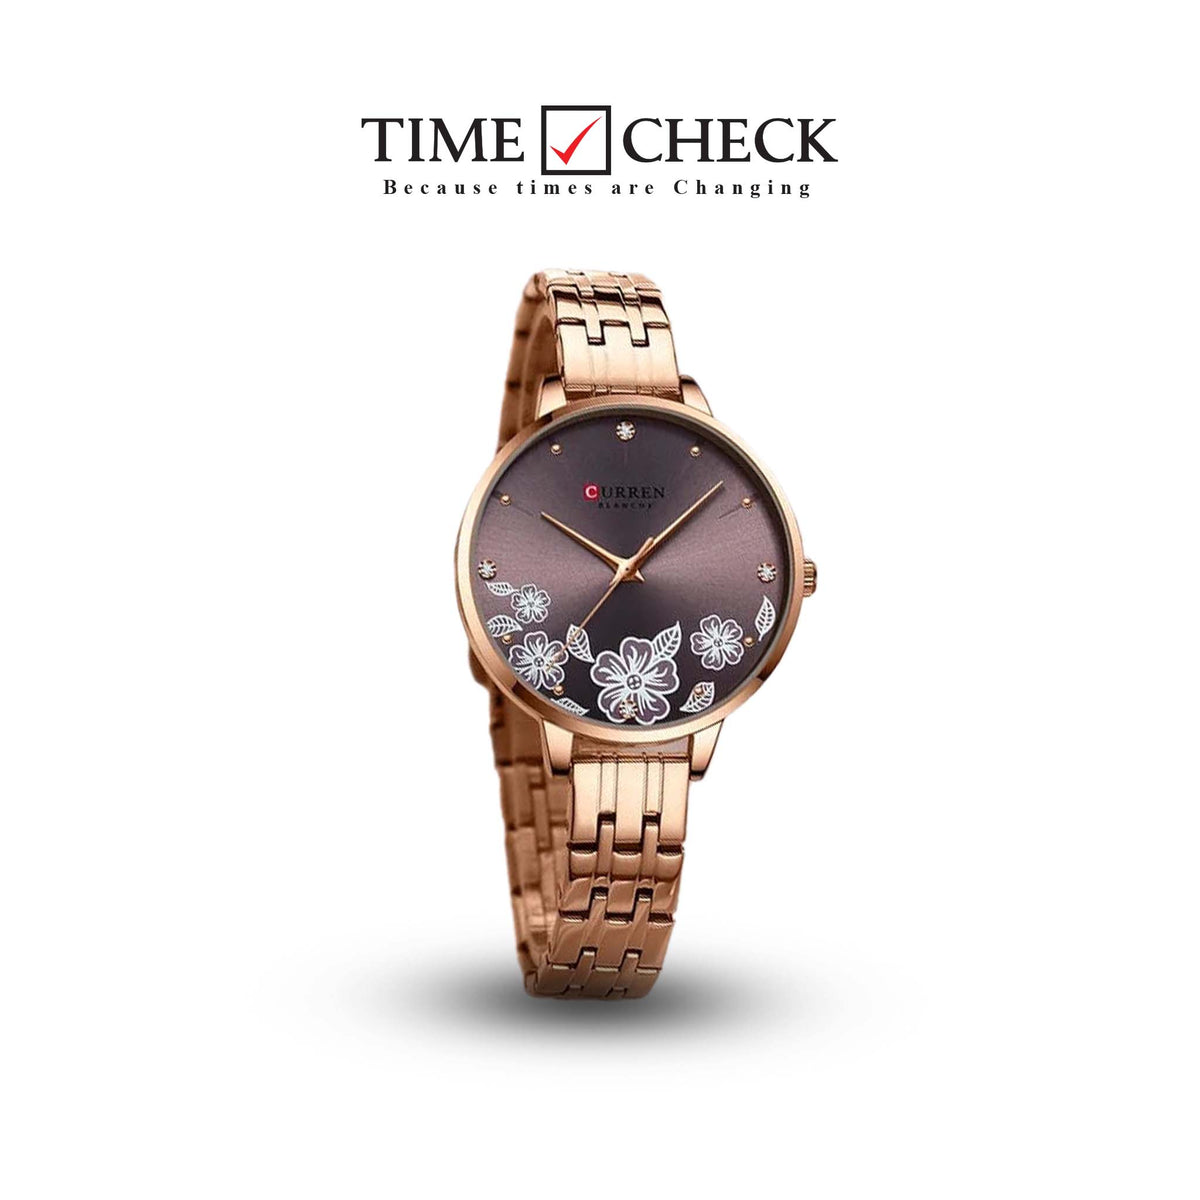 C-9068L Curren mahroon Dial & rose-gold Stainless Steel Chain Analog Quartz Women's Watch.